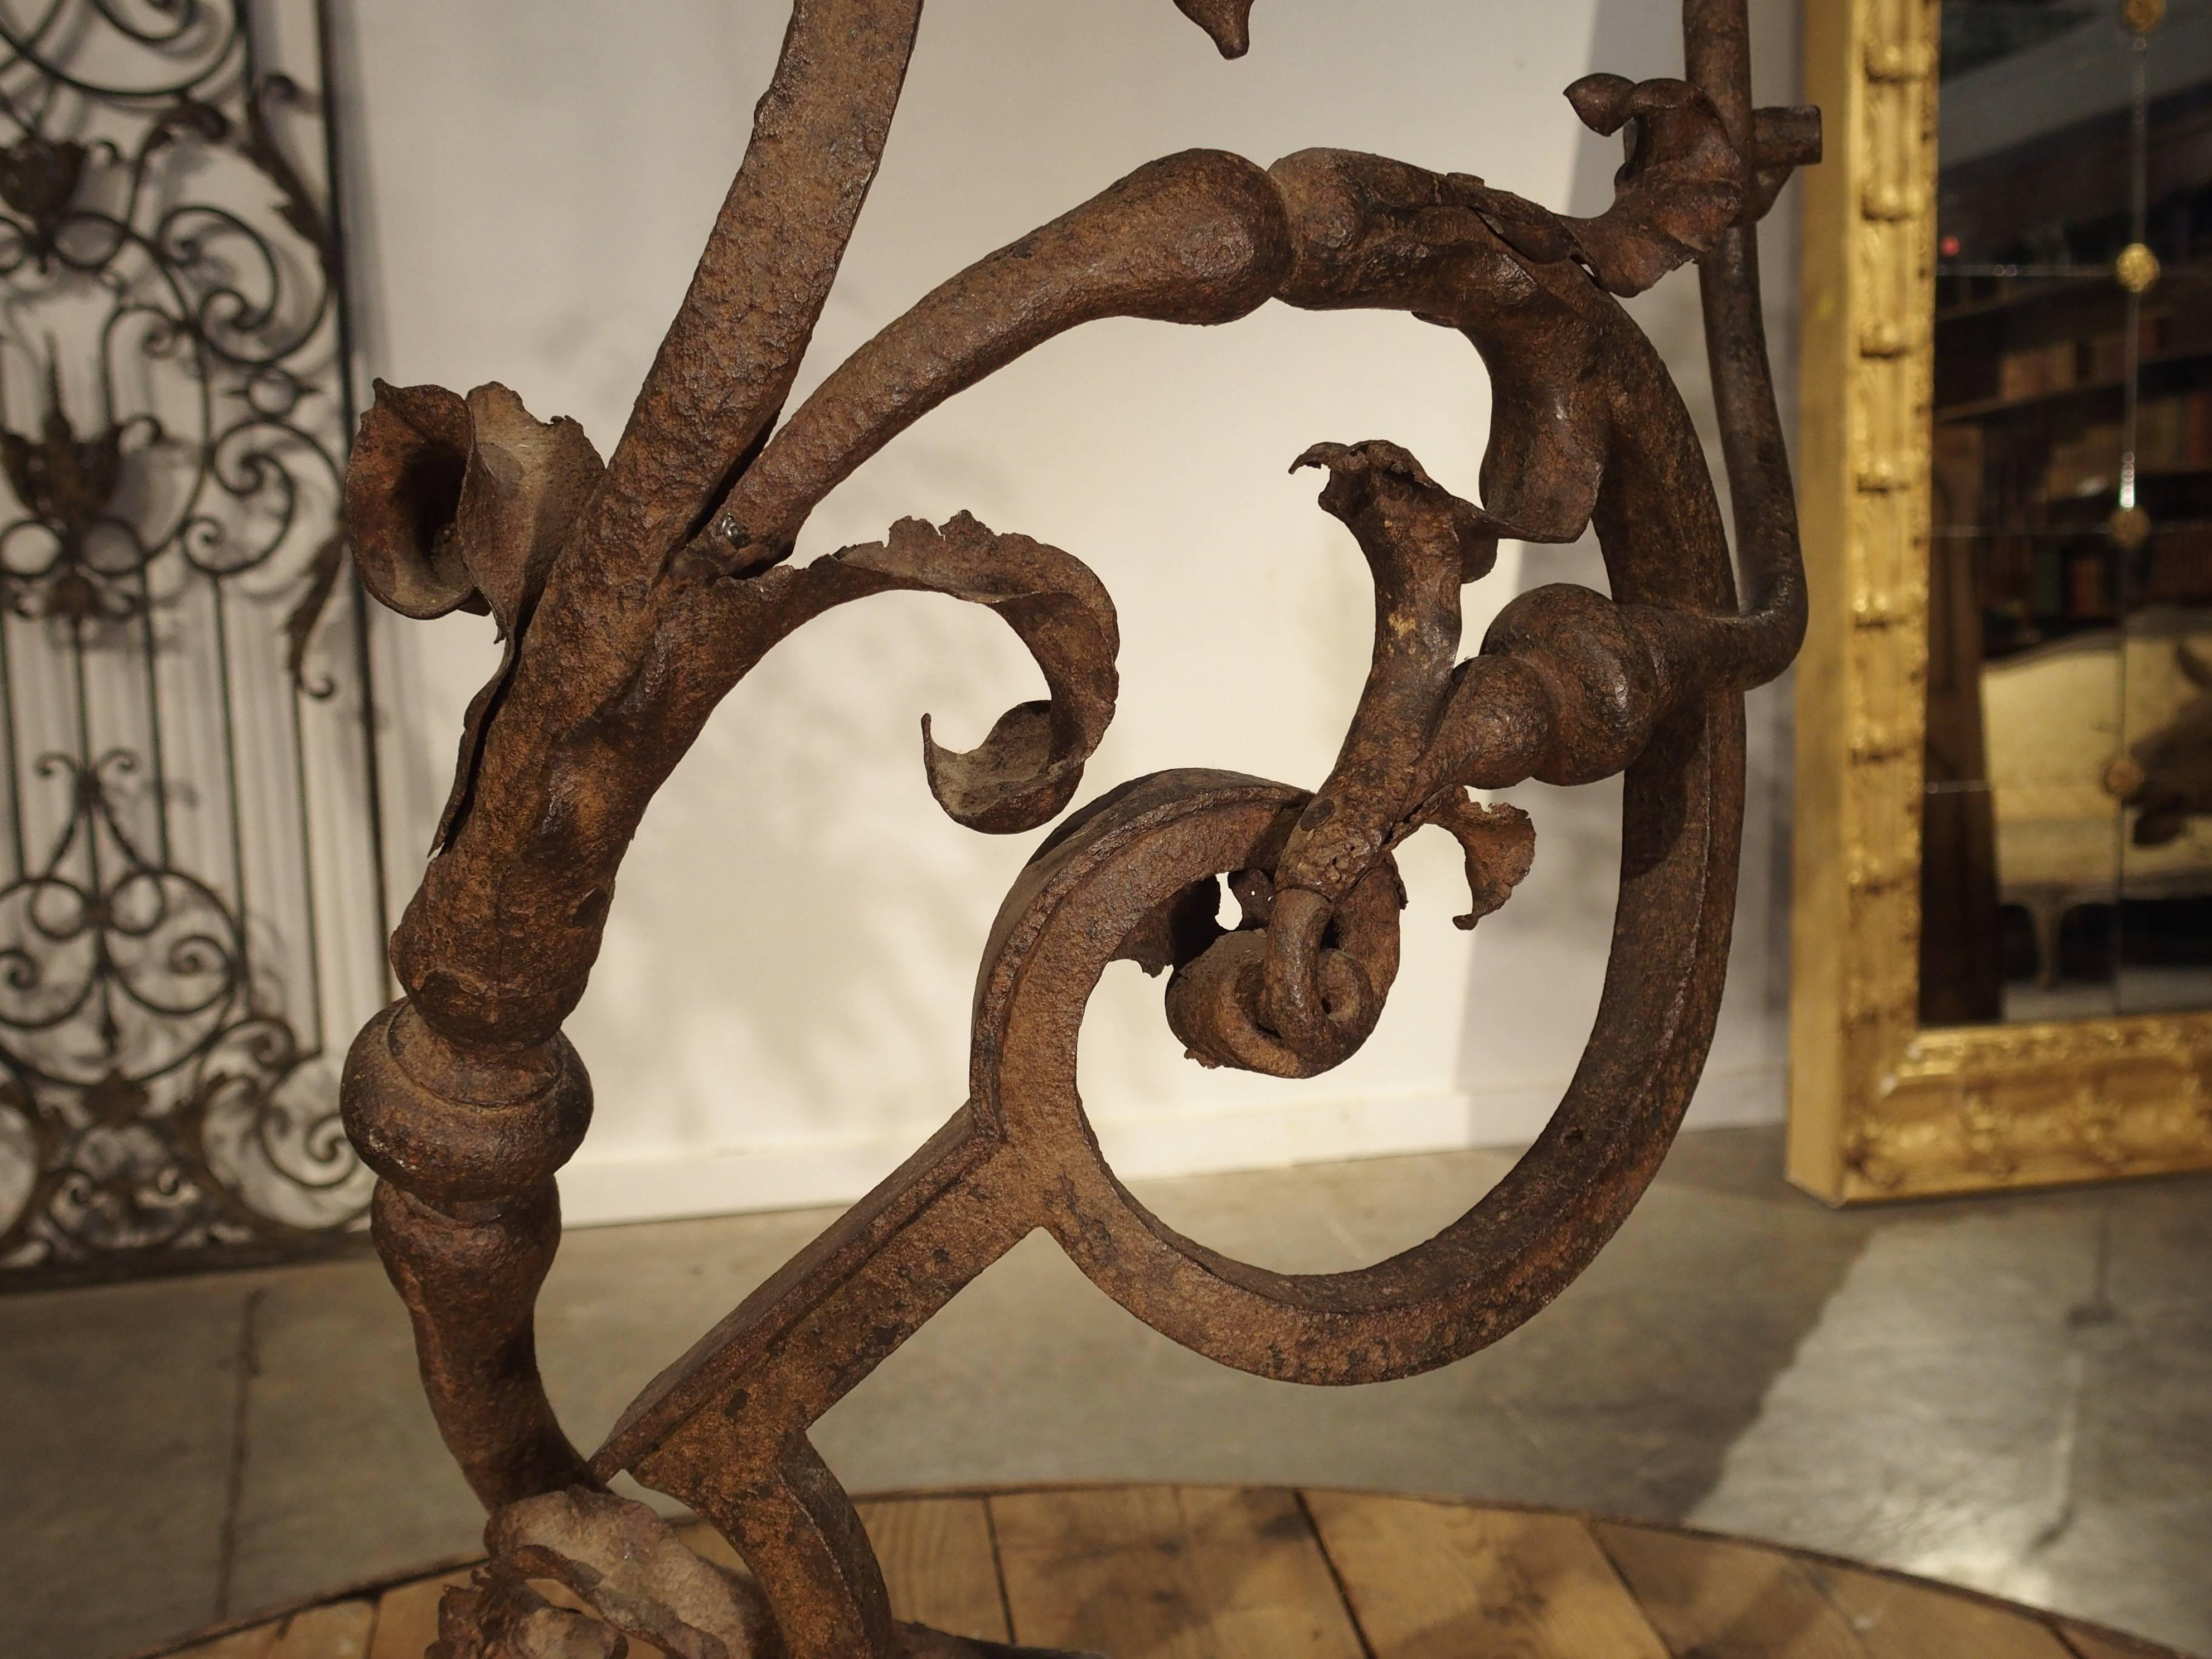 This graceful hand-forged iron stair railing fragment dates to the 1600s. It is high quality ironwork and stands on its original stone housing. There are some complete acanthus leaves in areas with fragments elsewhere, all very delicately made by